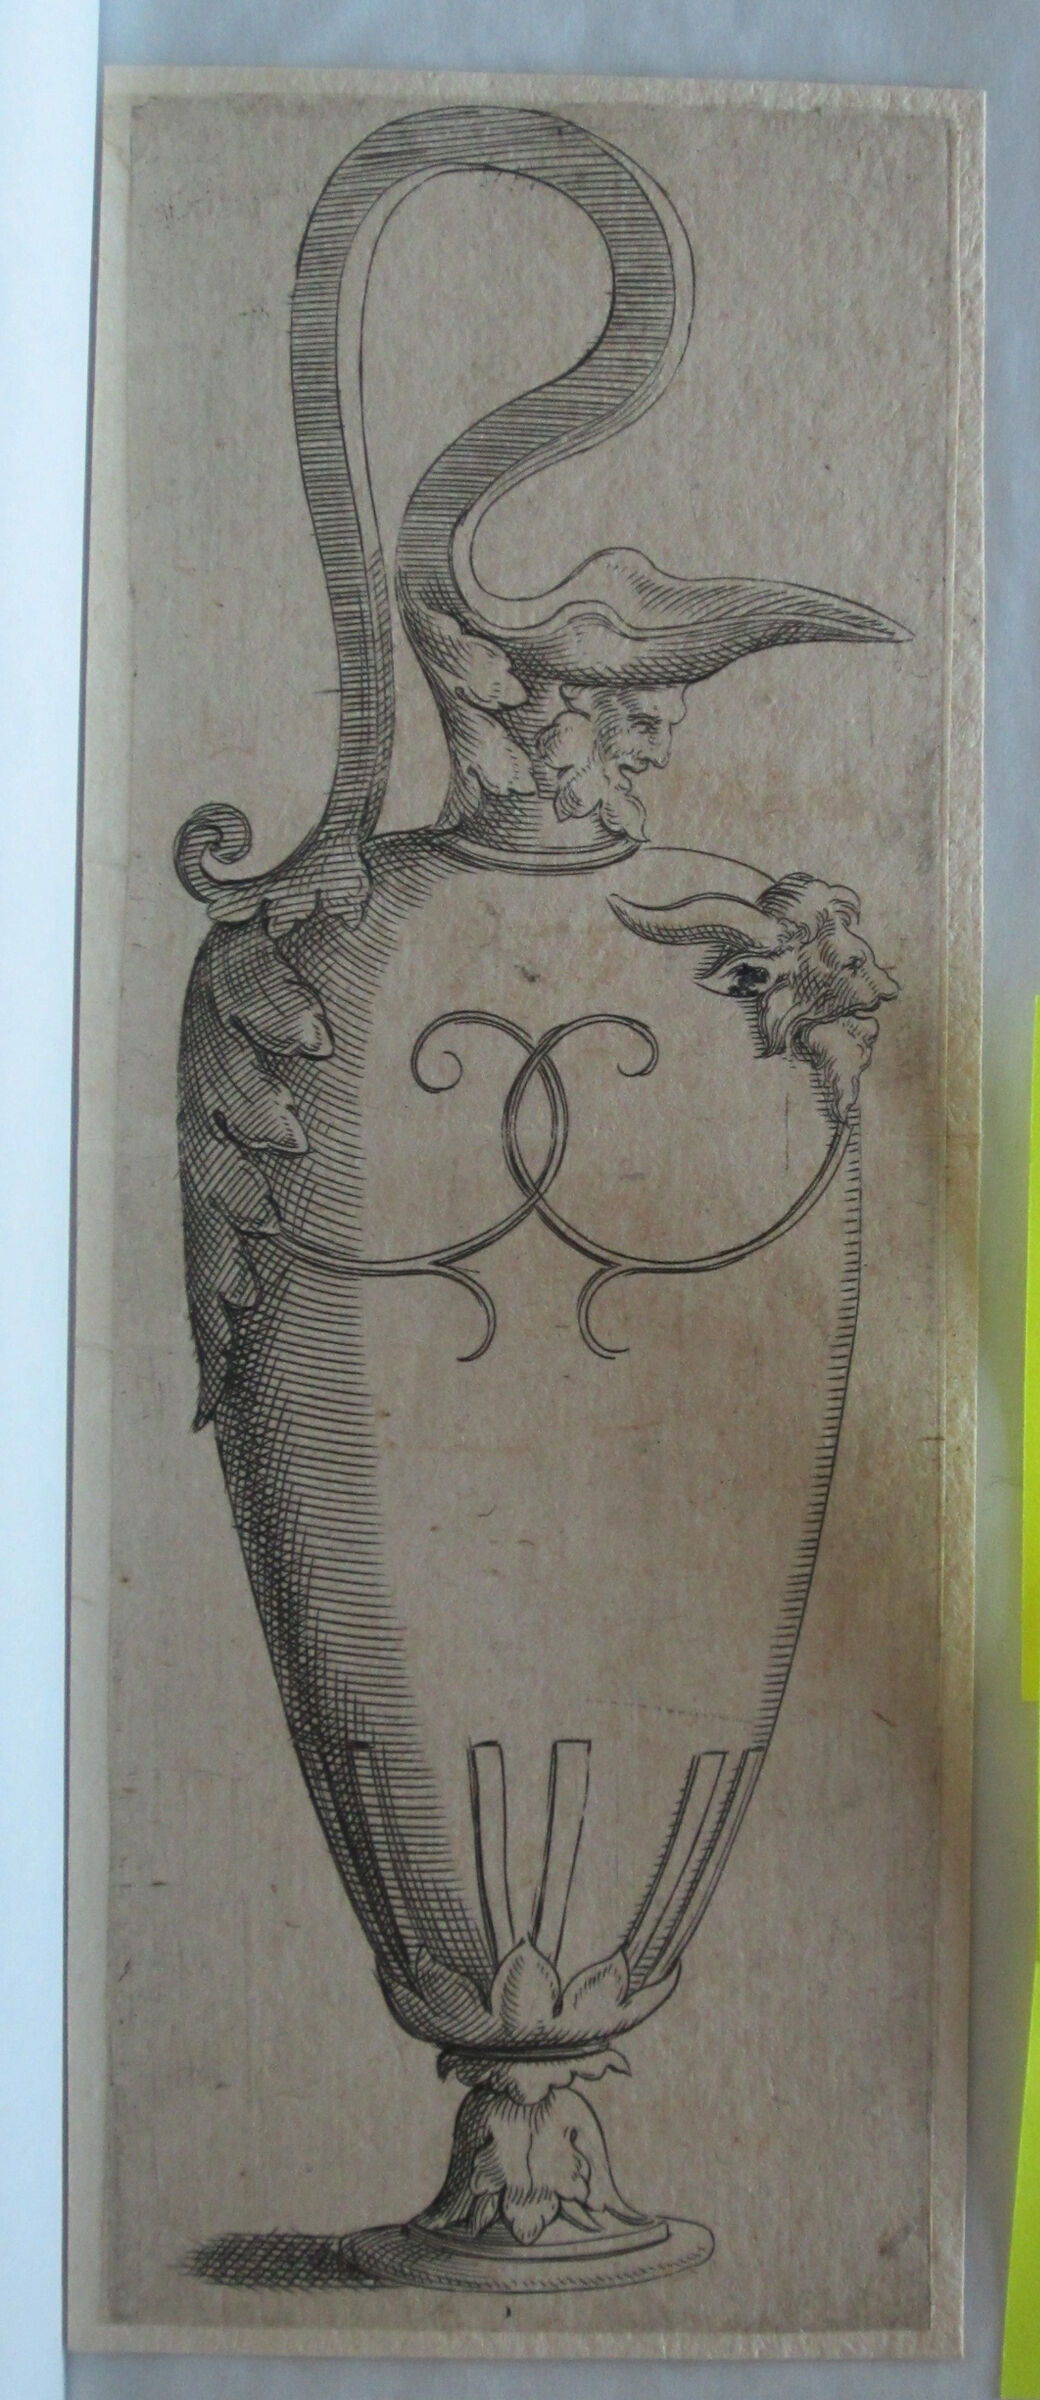 Tall Ewer With The Head Of A Faun On The Body, The Head Of A Green Man Under The Spout